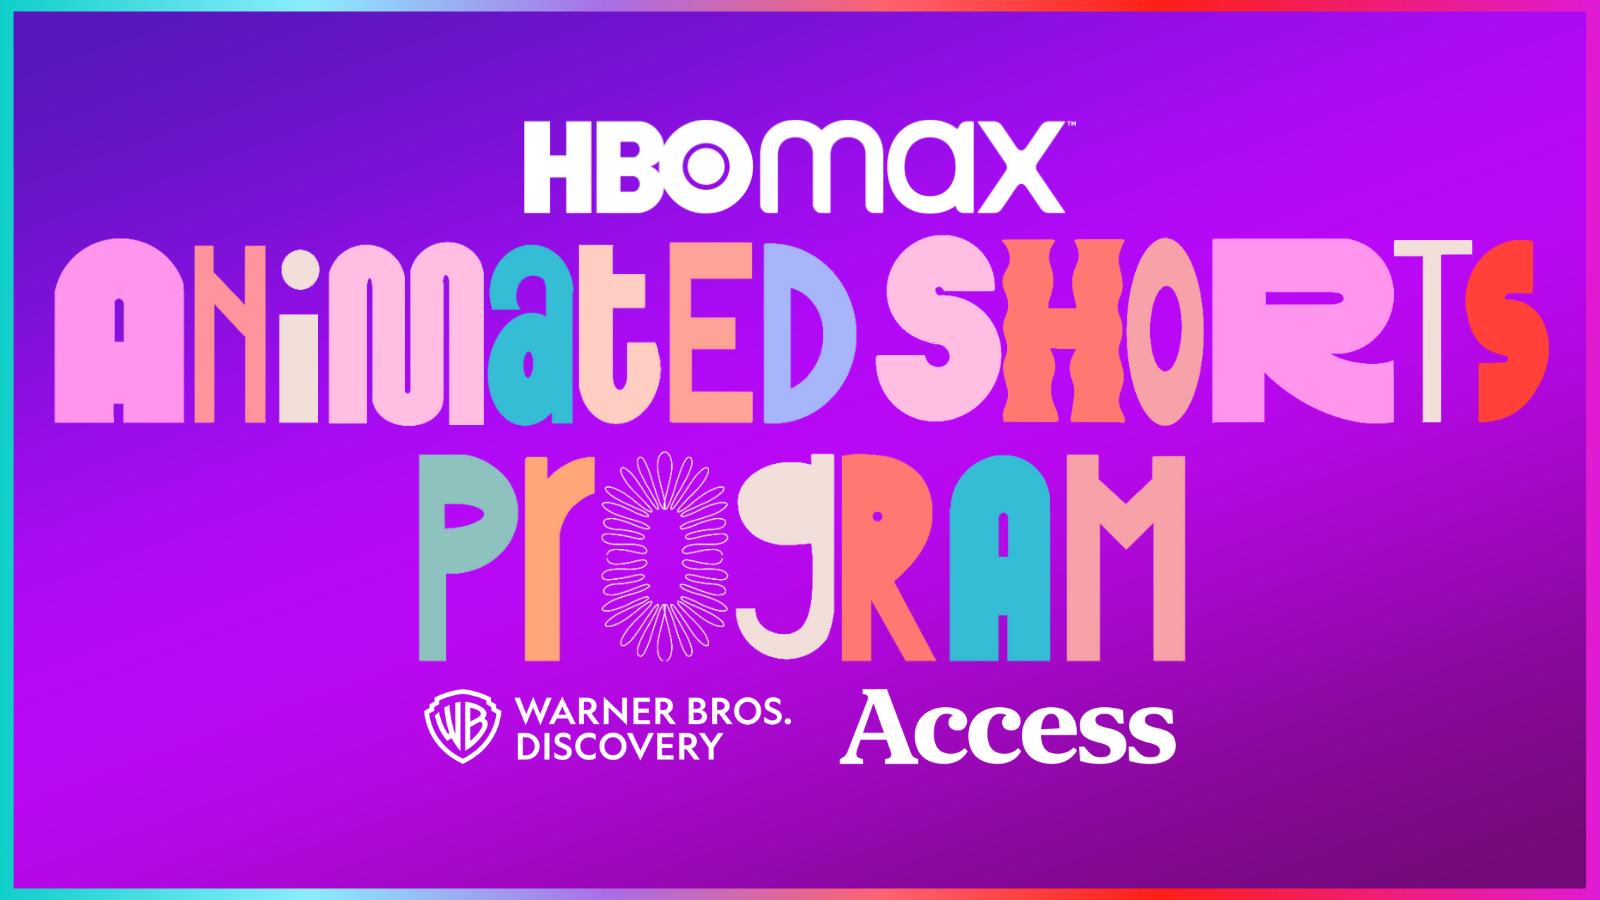 HBO MAX x WARNER BROS. DISCOVERY ACCESS ANIMATED SHORTS TO STREAM